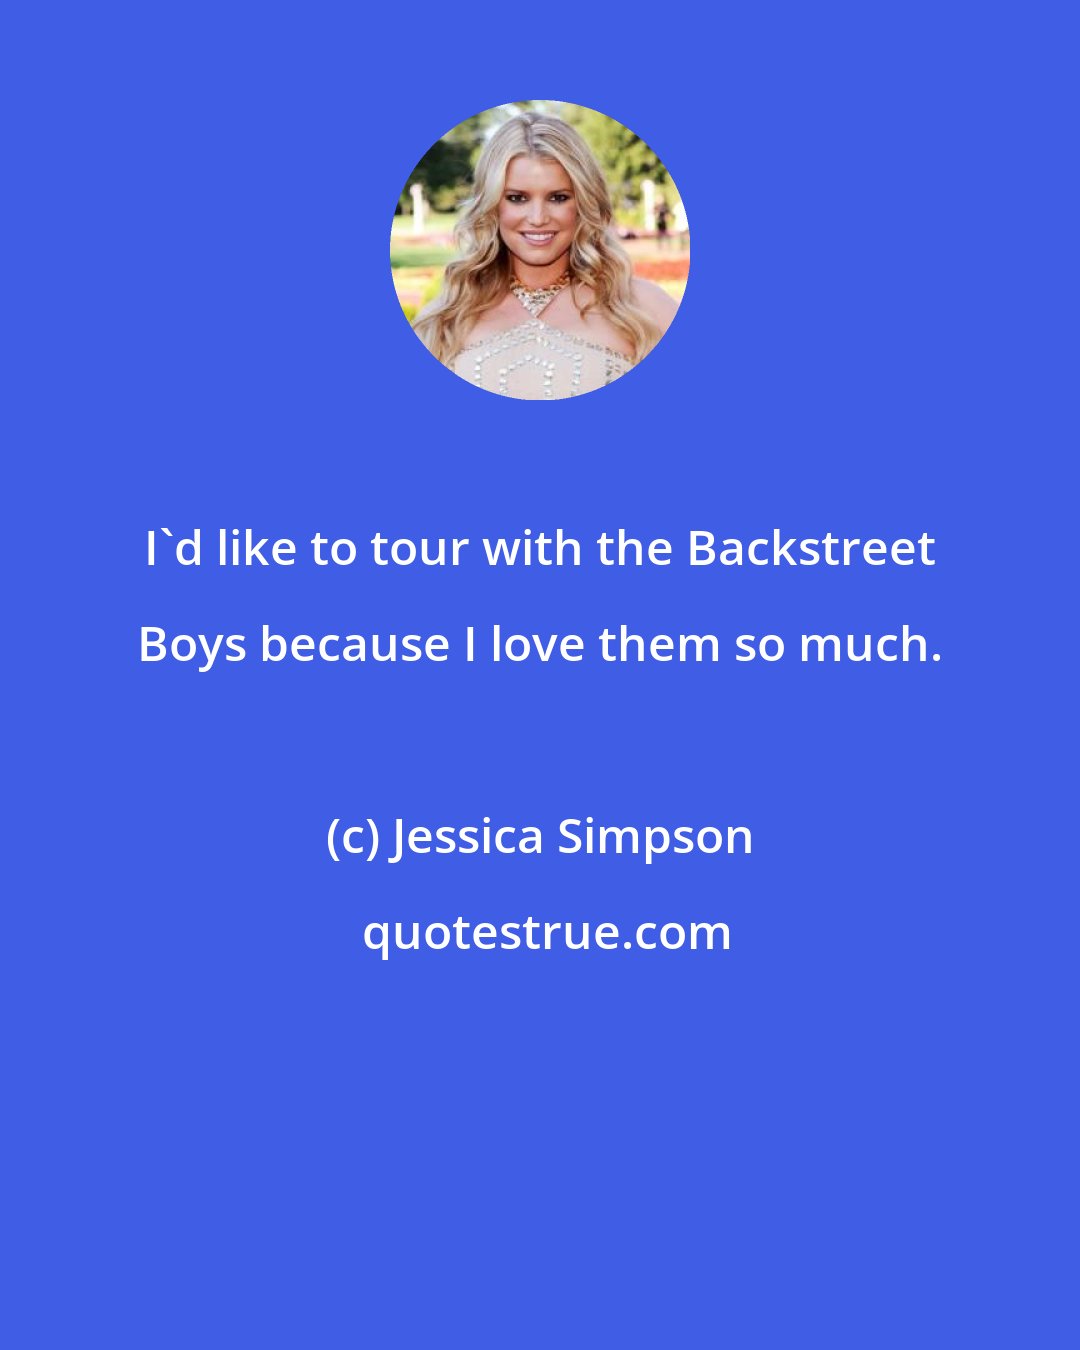 Jessica Simpson: I'd like to tour with the Backstreet Boys because I love them so much.